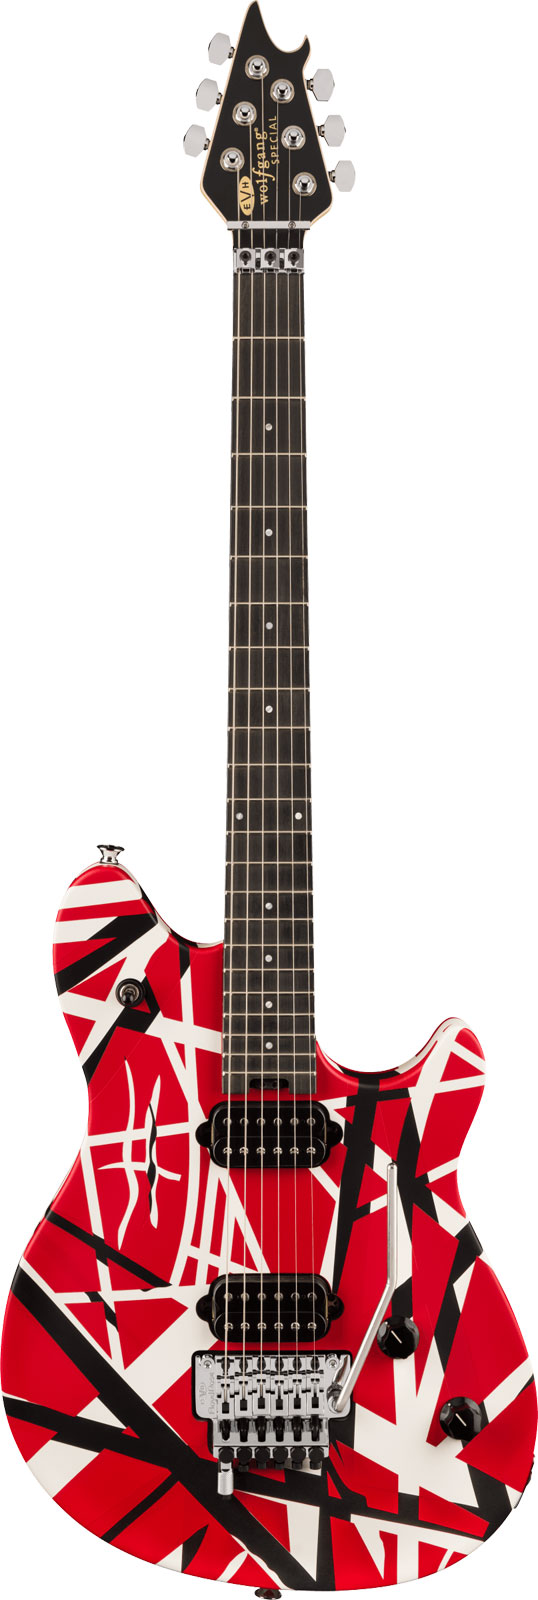 EVH WOLFGANG SPECIAL STRIPED SERIES, EBONY FINGERBOARD, RED, BLACK, AND WHITE